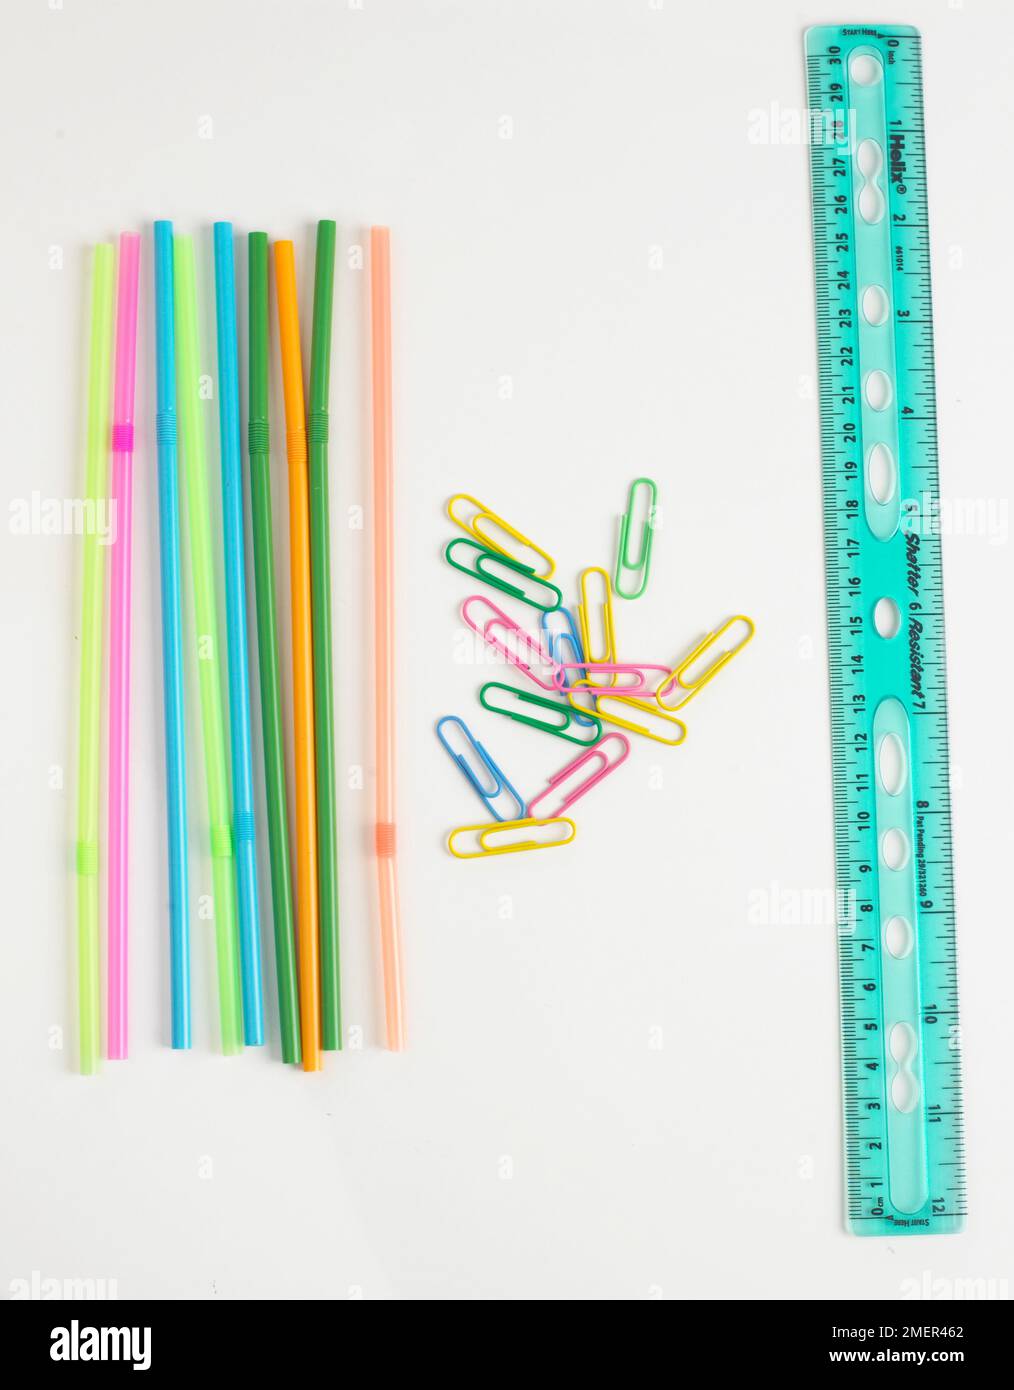 Colourful drinking straws, paper clips, and a ruler Stock Photo